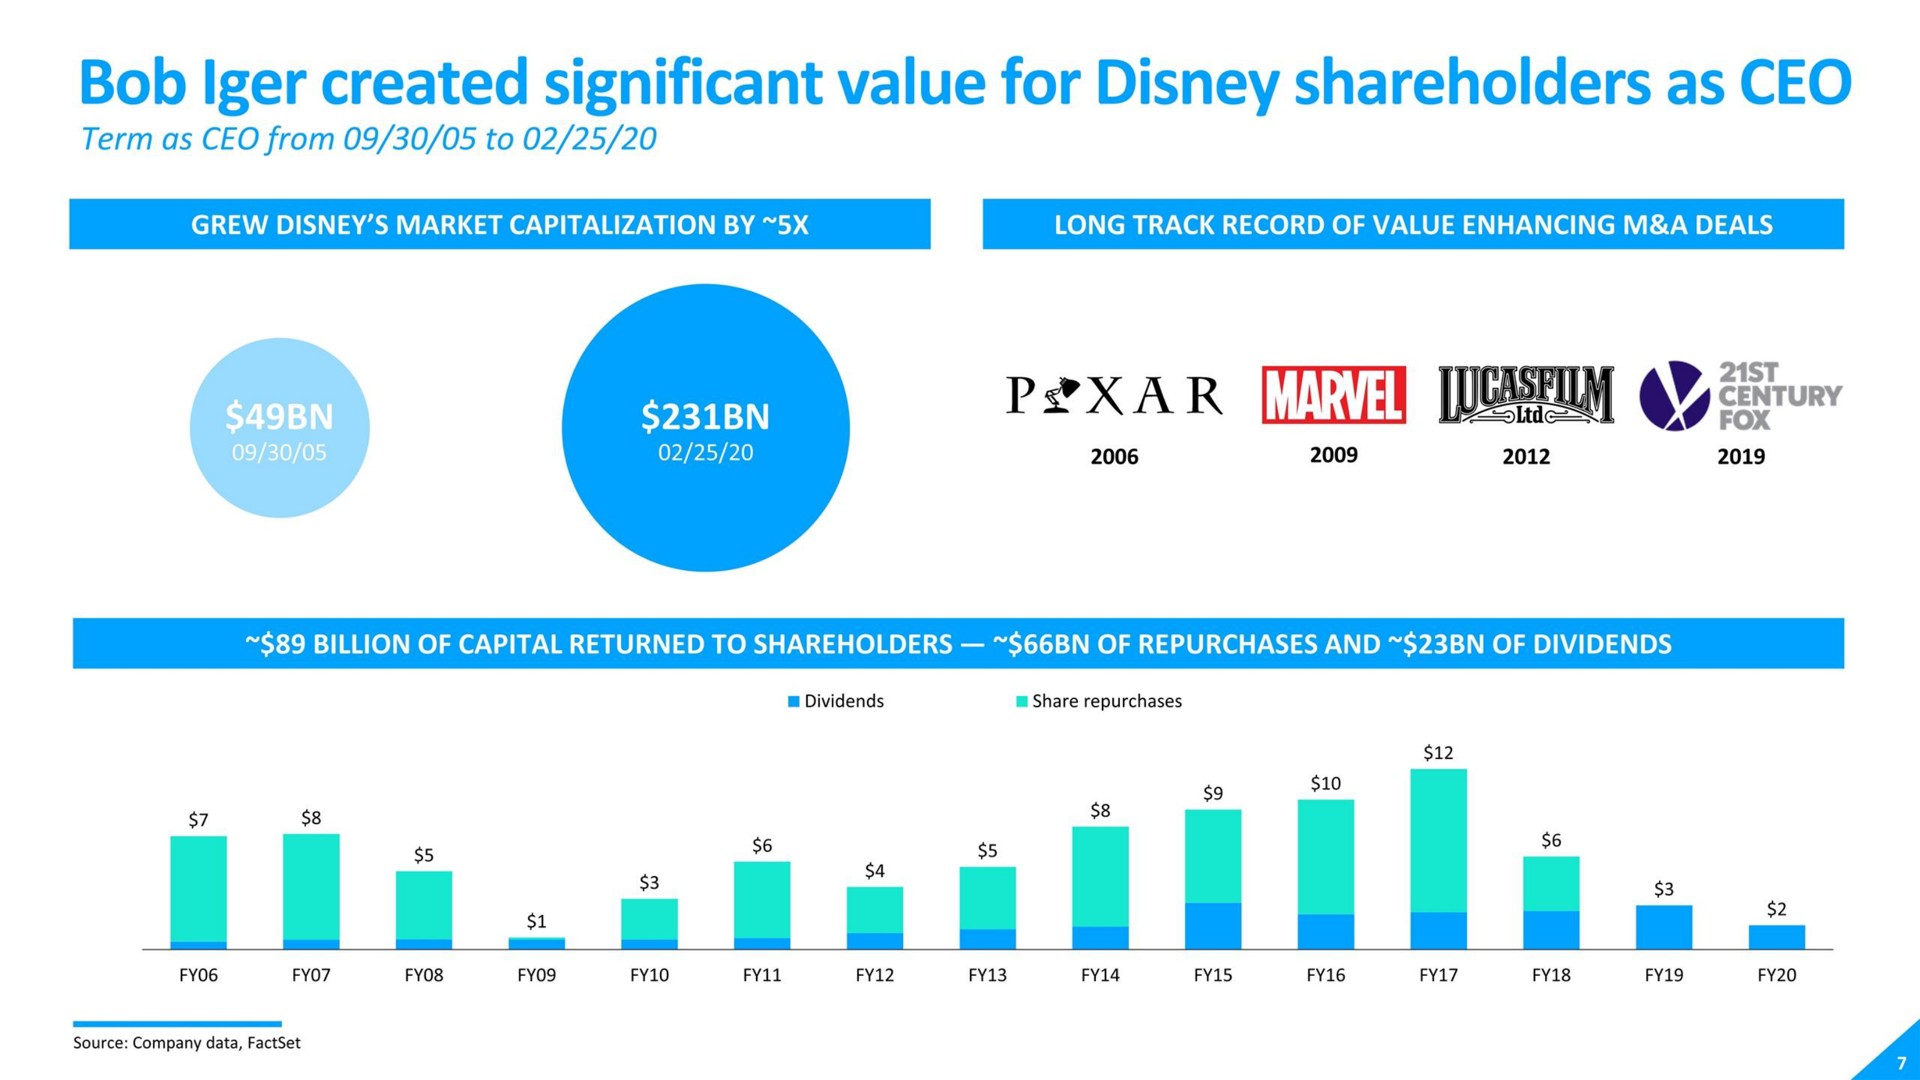 bob created significant value for shareholders as dose | Disney